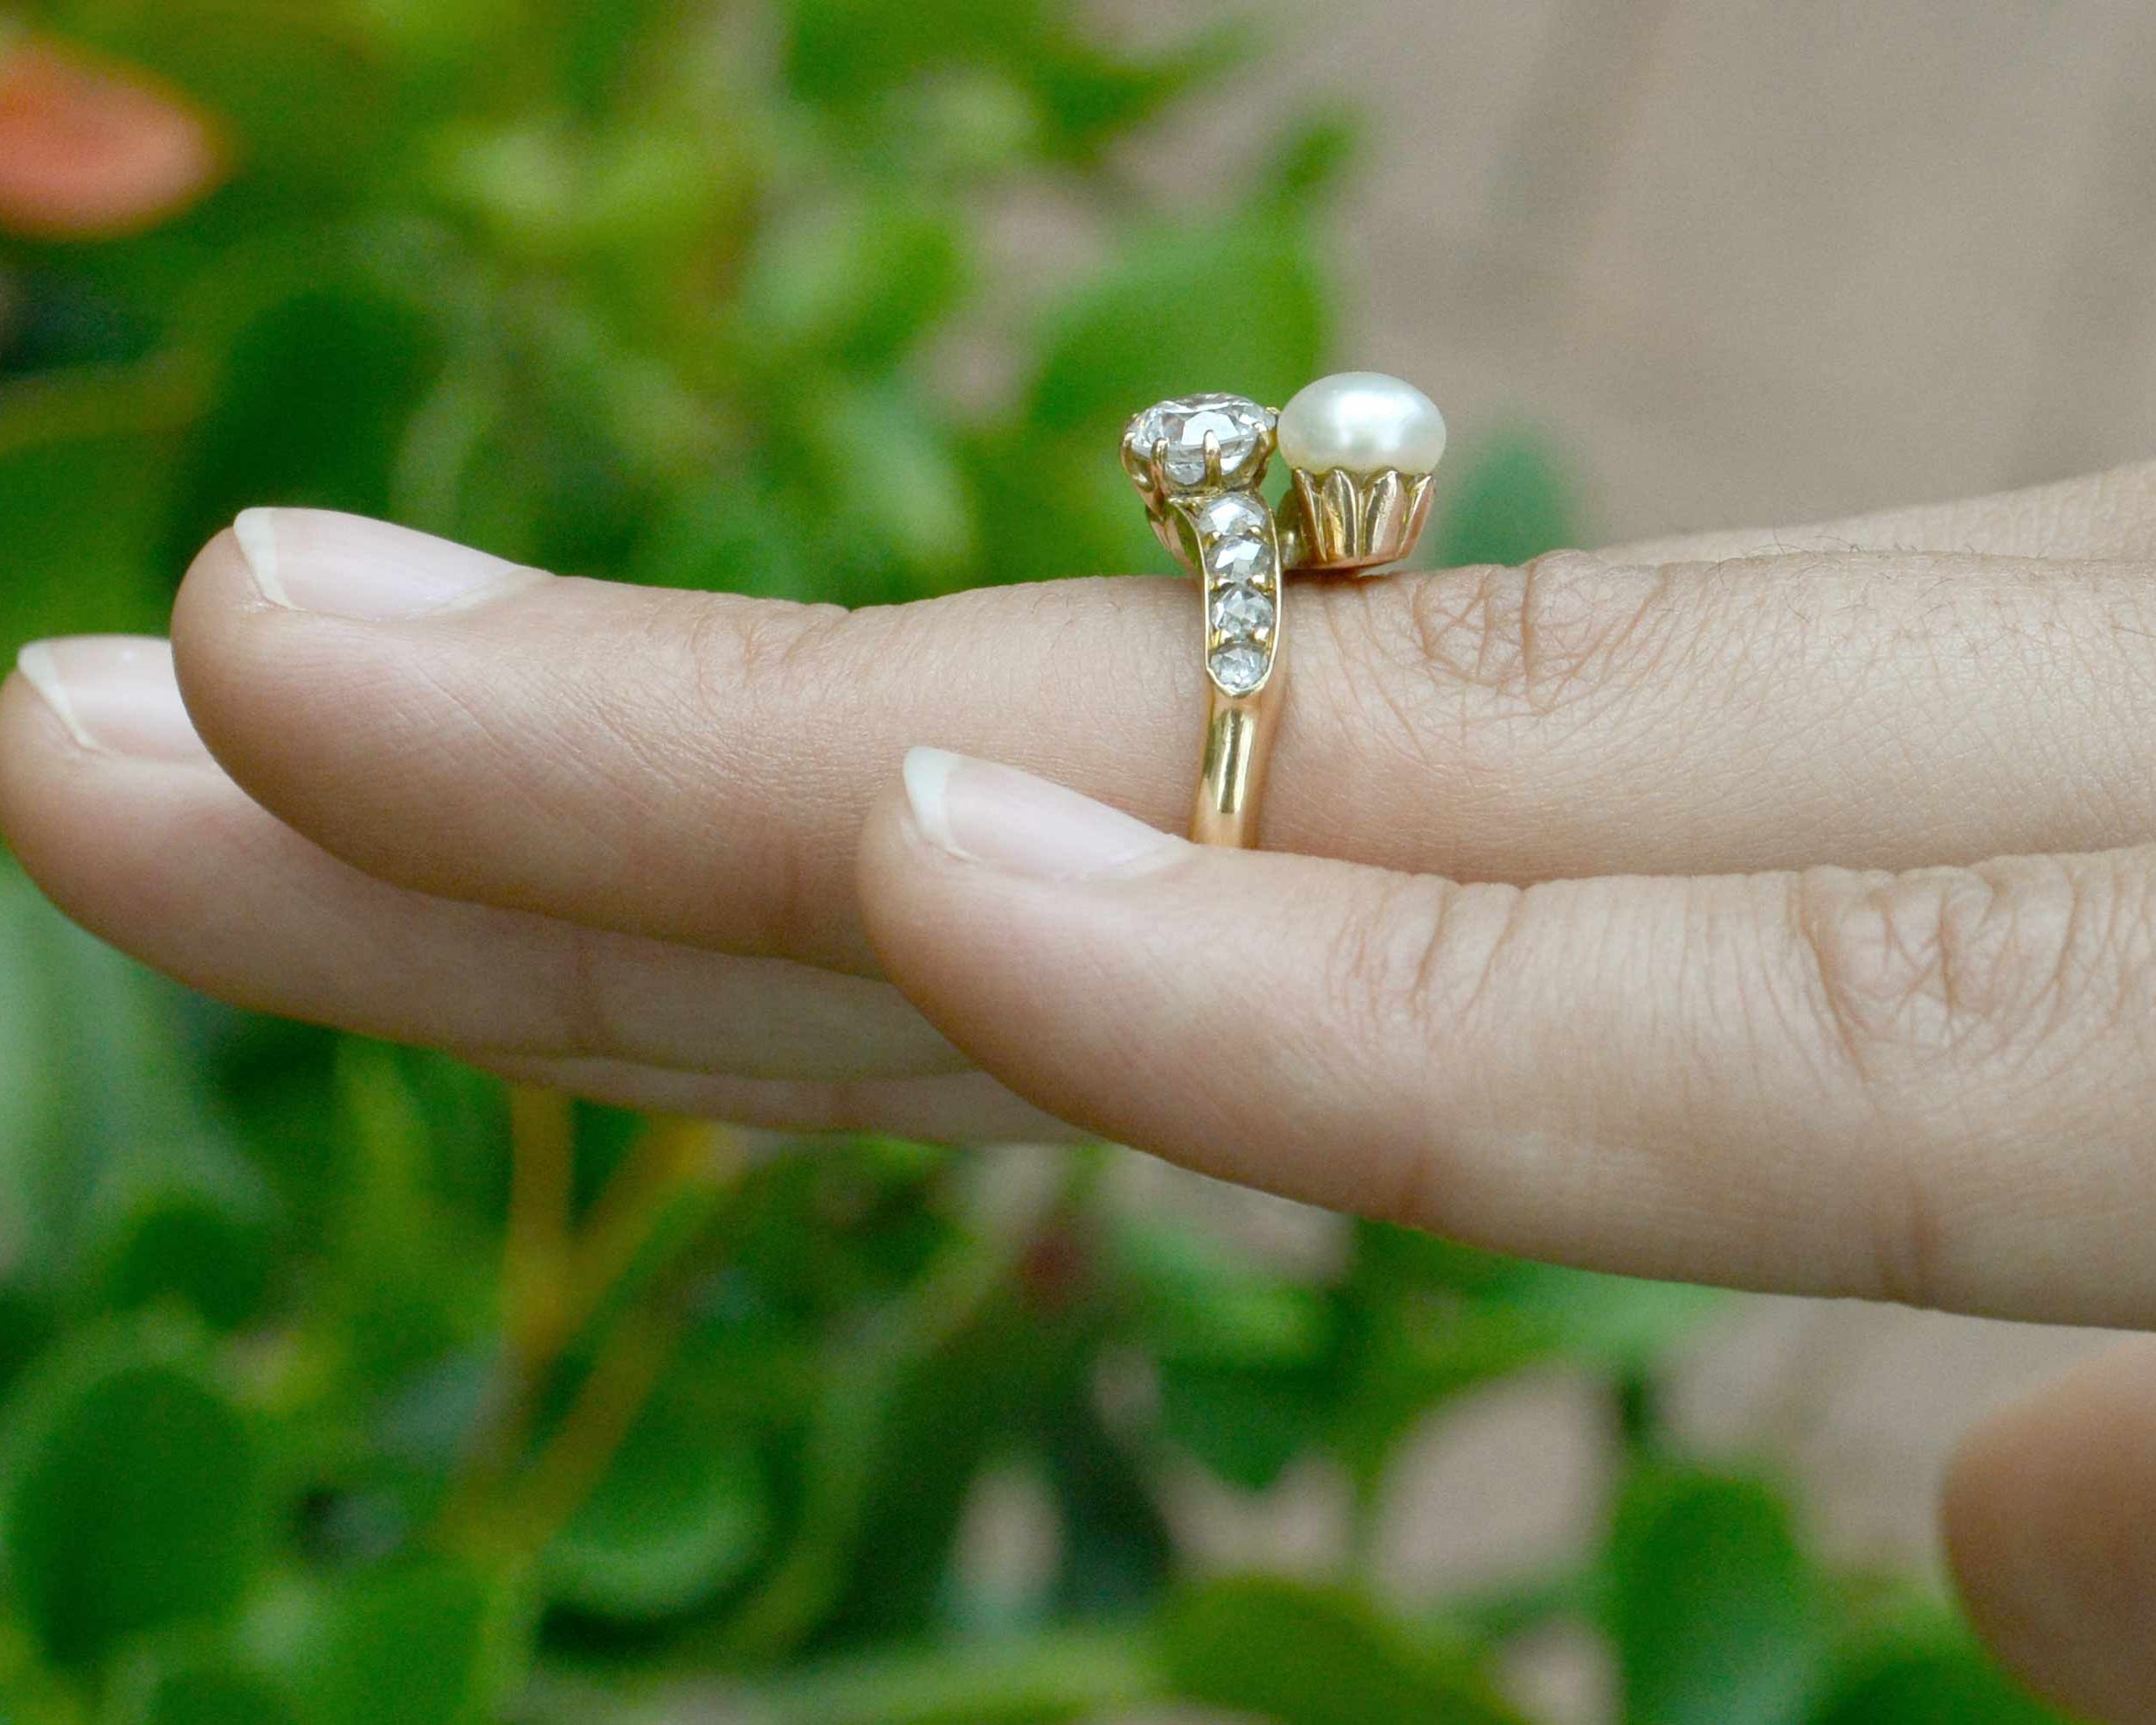 This gold wedding ring features a diamond and pearl in the center.